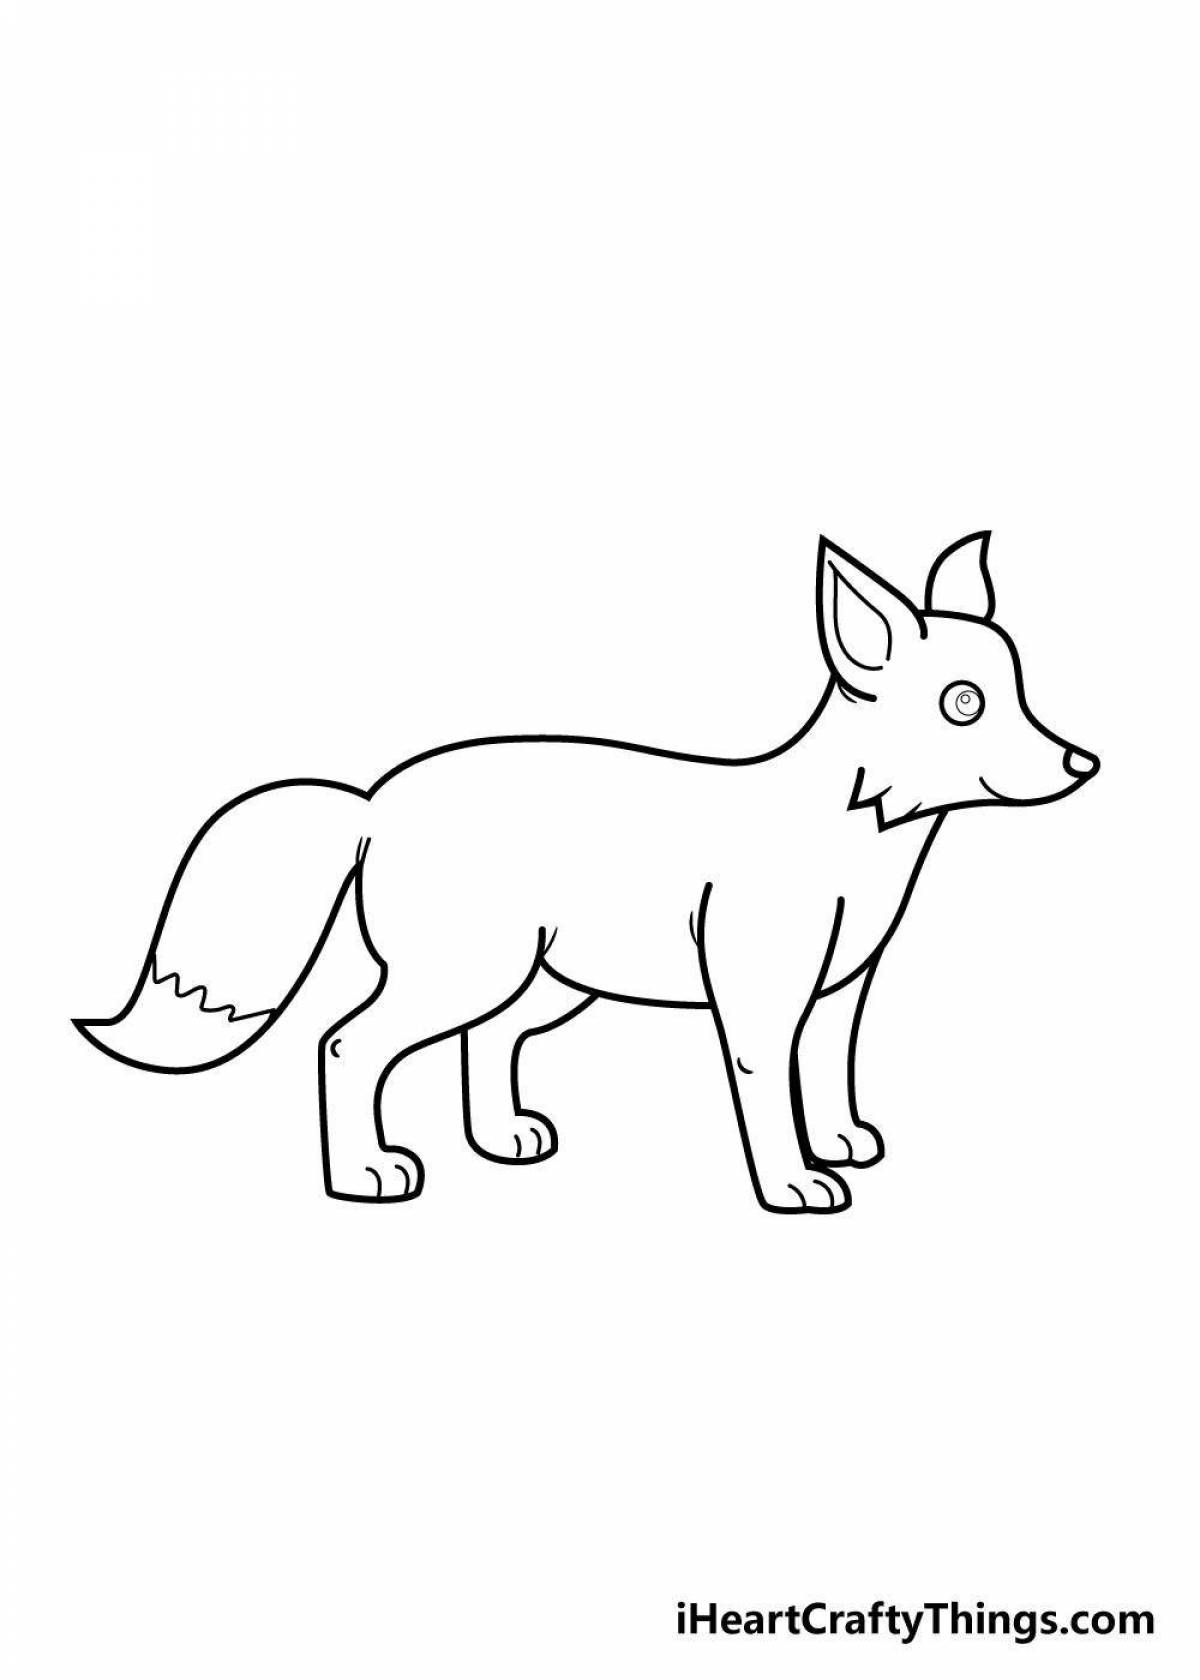 Fun fox coloring for children 6-7 years old